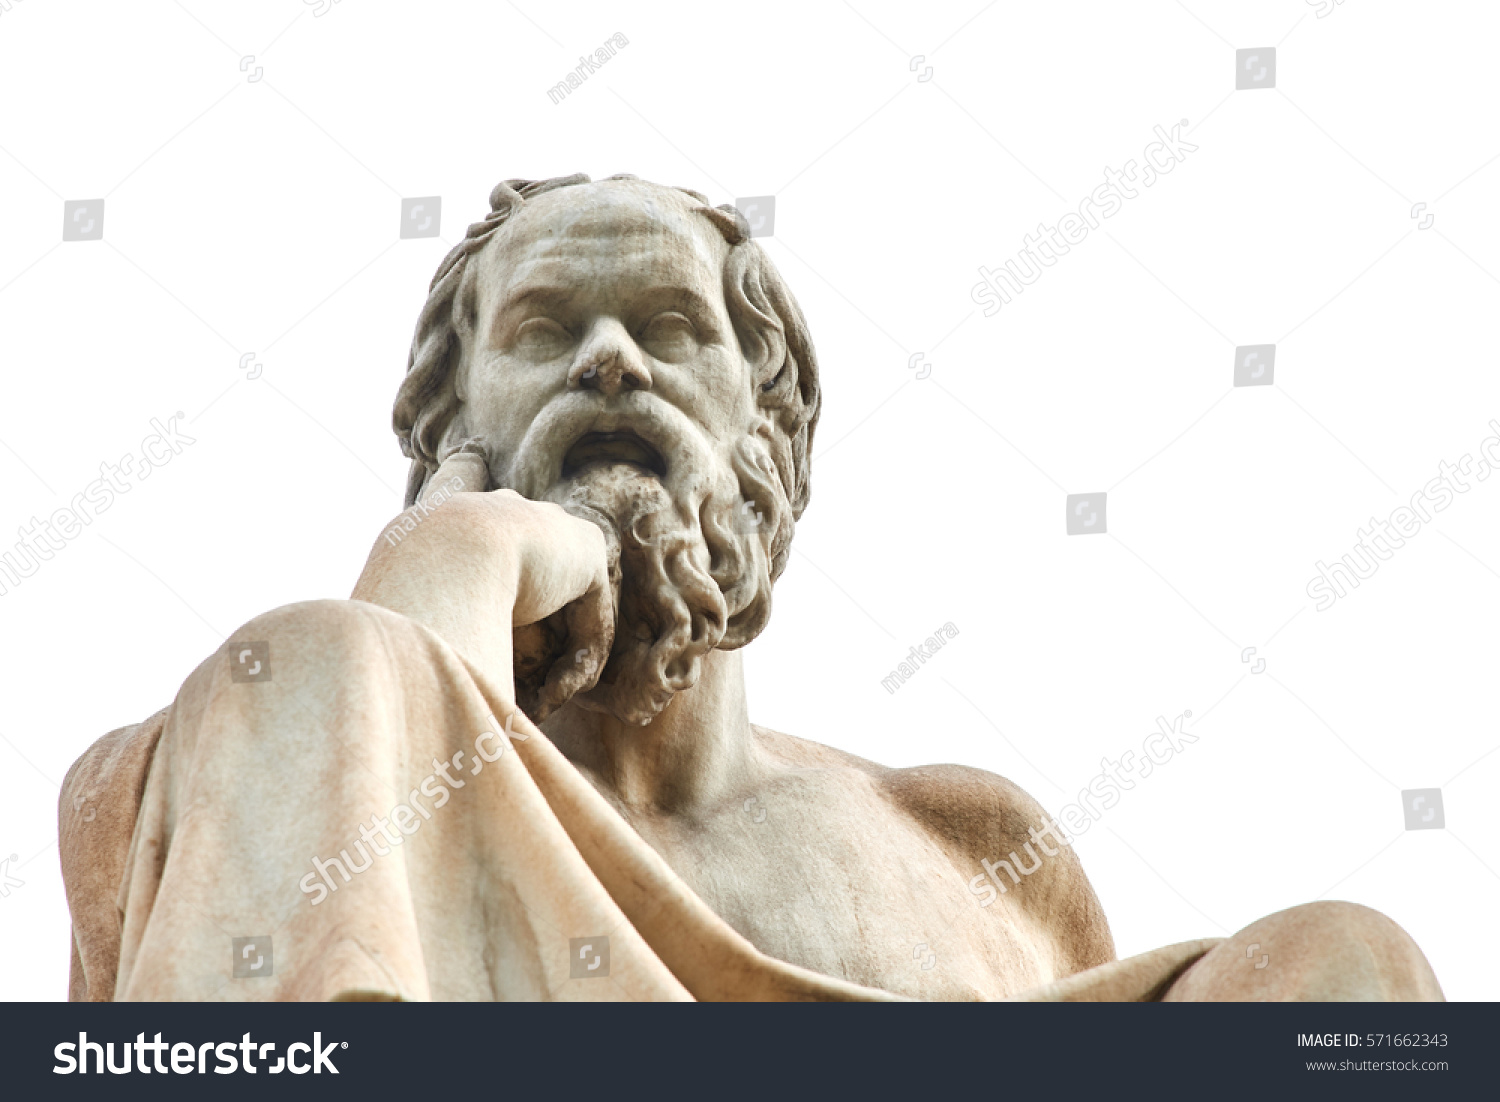 stock-photo-statue-of-ancient-greek-philosopher-socrates-in-athens-571662343.jpg